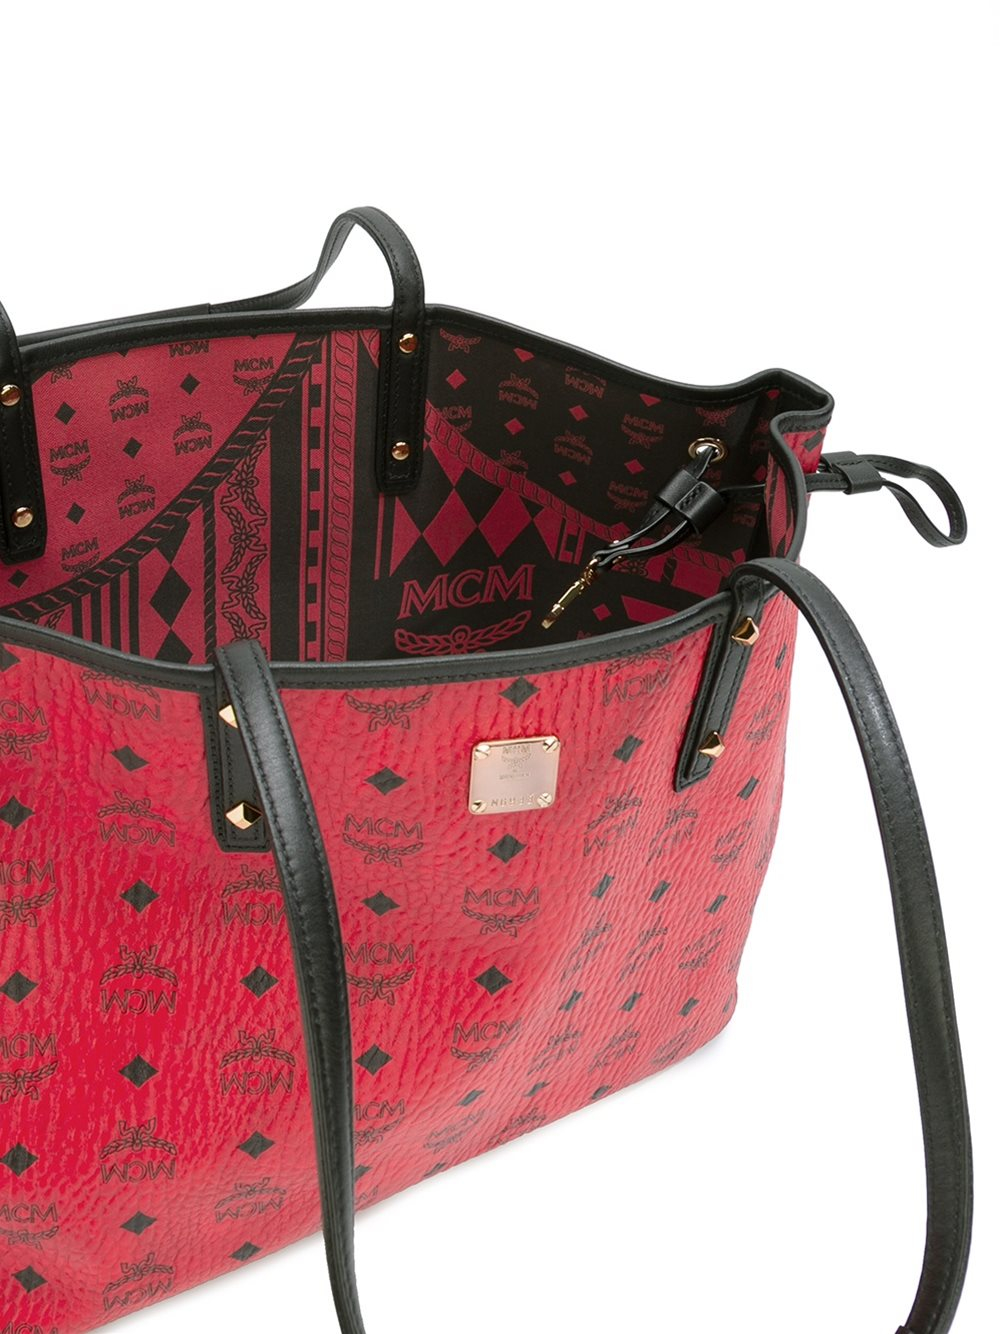 Mcm Bag Macys | Confederated Tribes of the Umatilla Indian Reservation